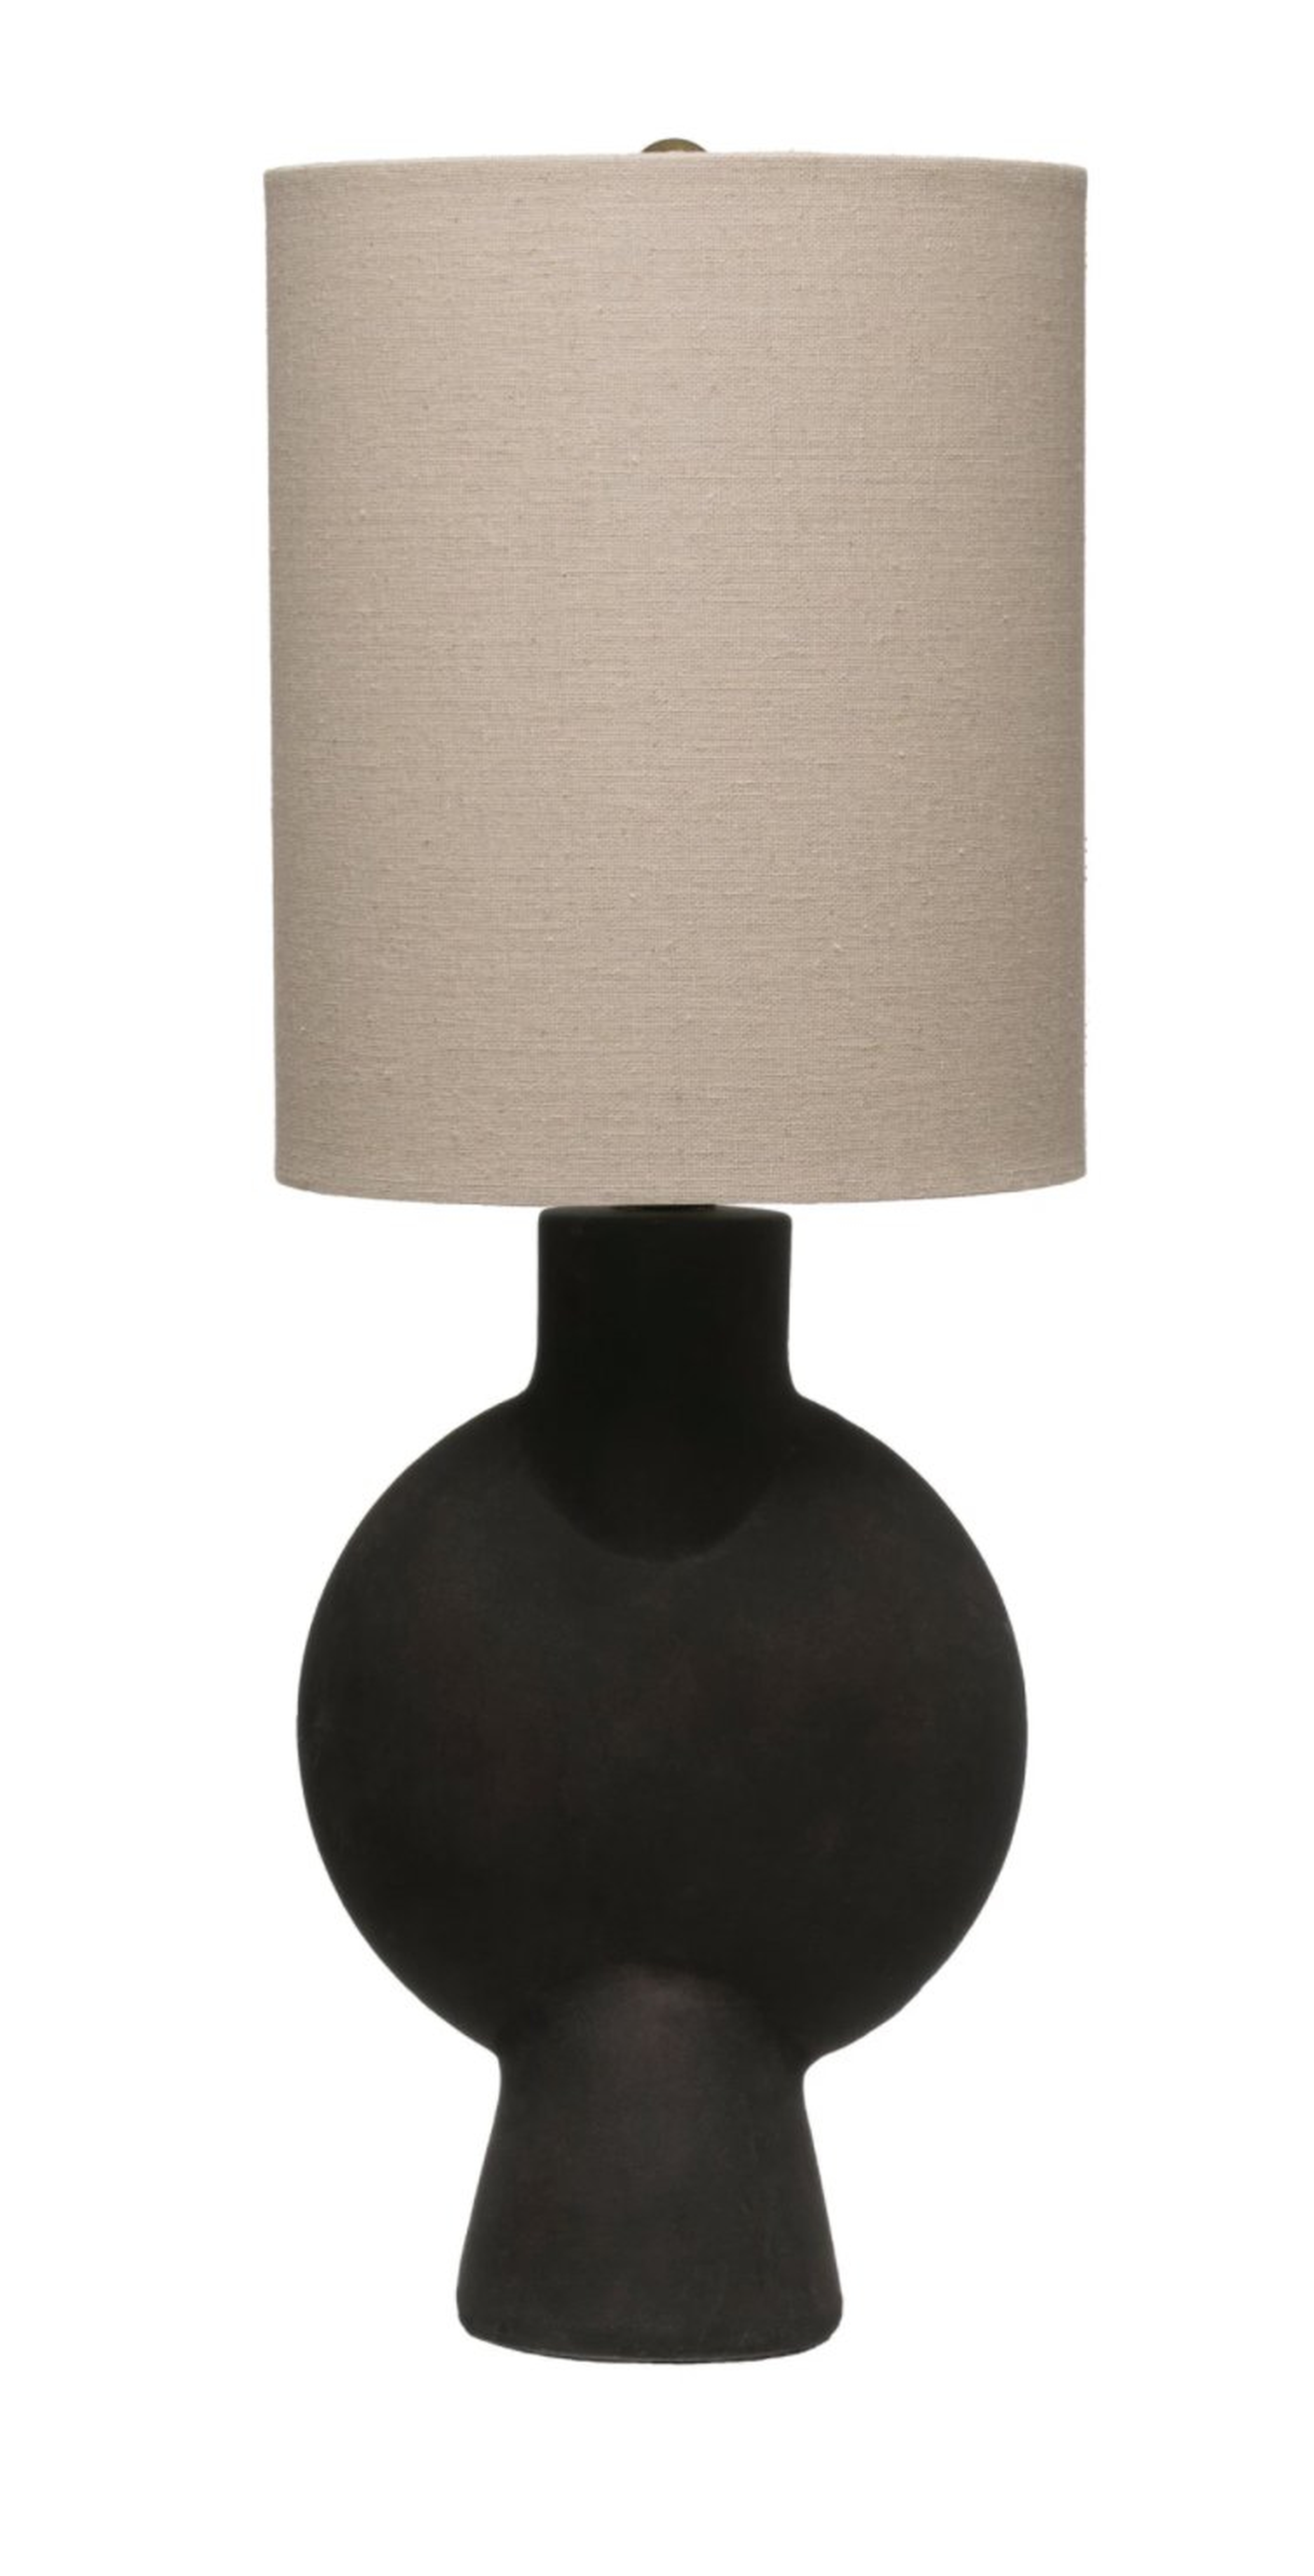 Terracotta Table Lamp with Linen Shade (set of 2) - Moss & Wilder